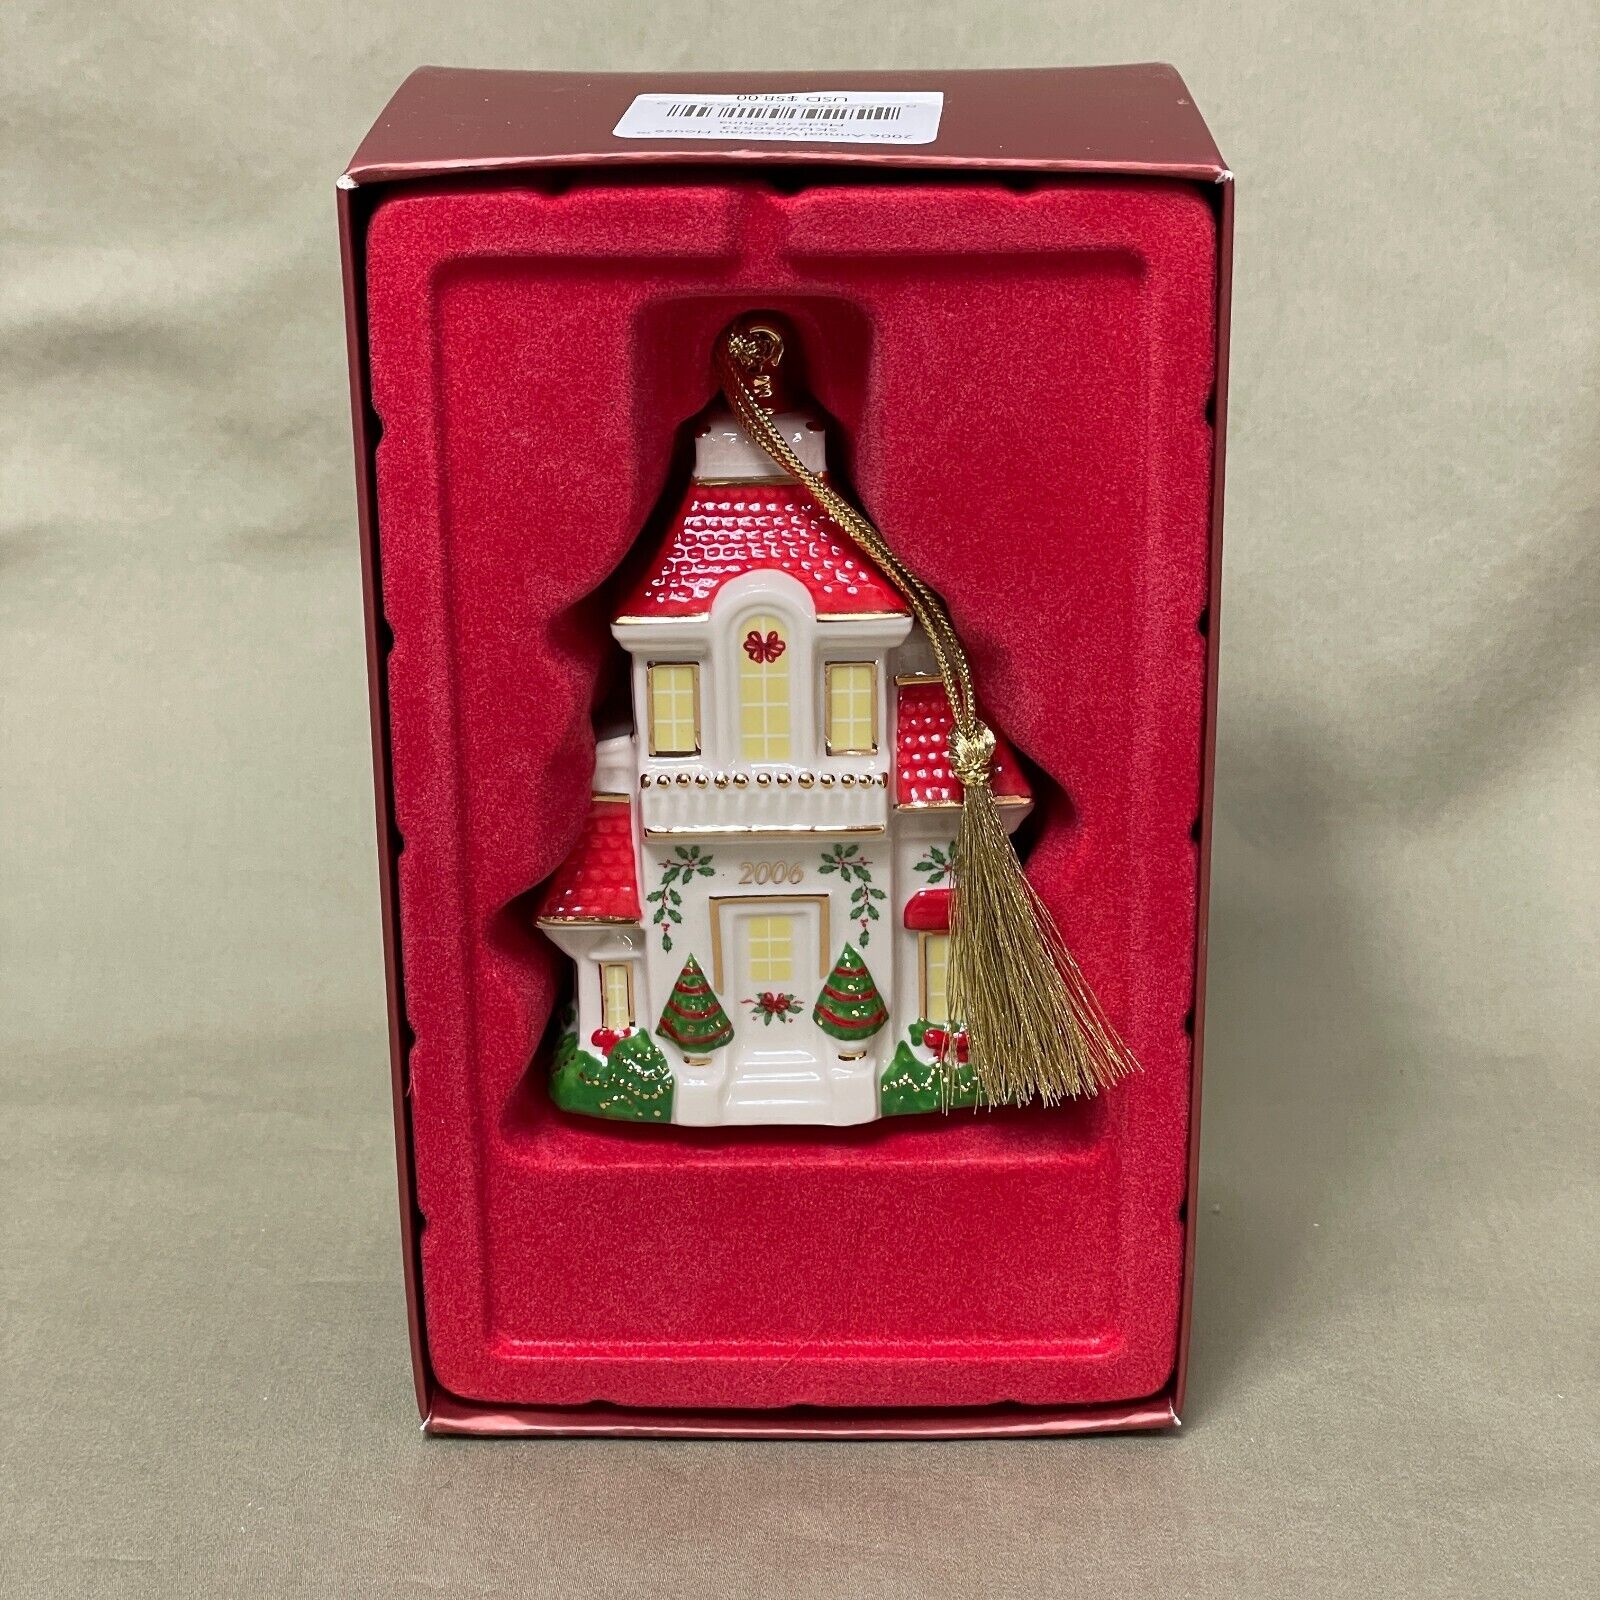 2006 Lenox Annual Victorian Hour 760533 Christmas Ornament Handcrafted